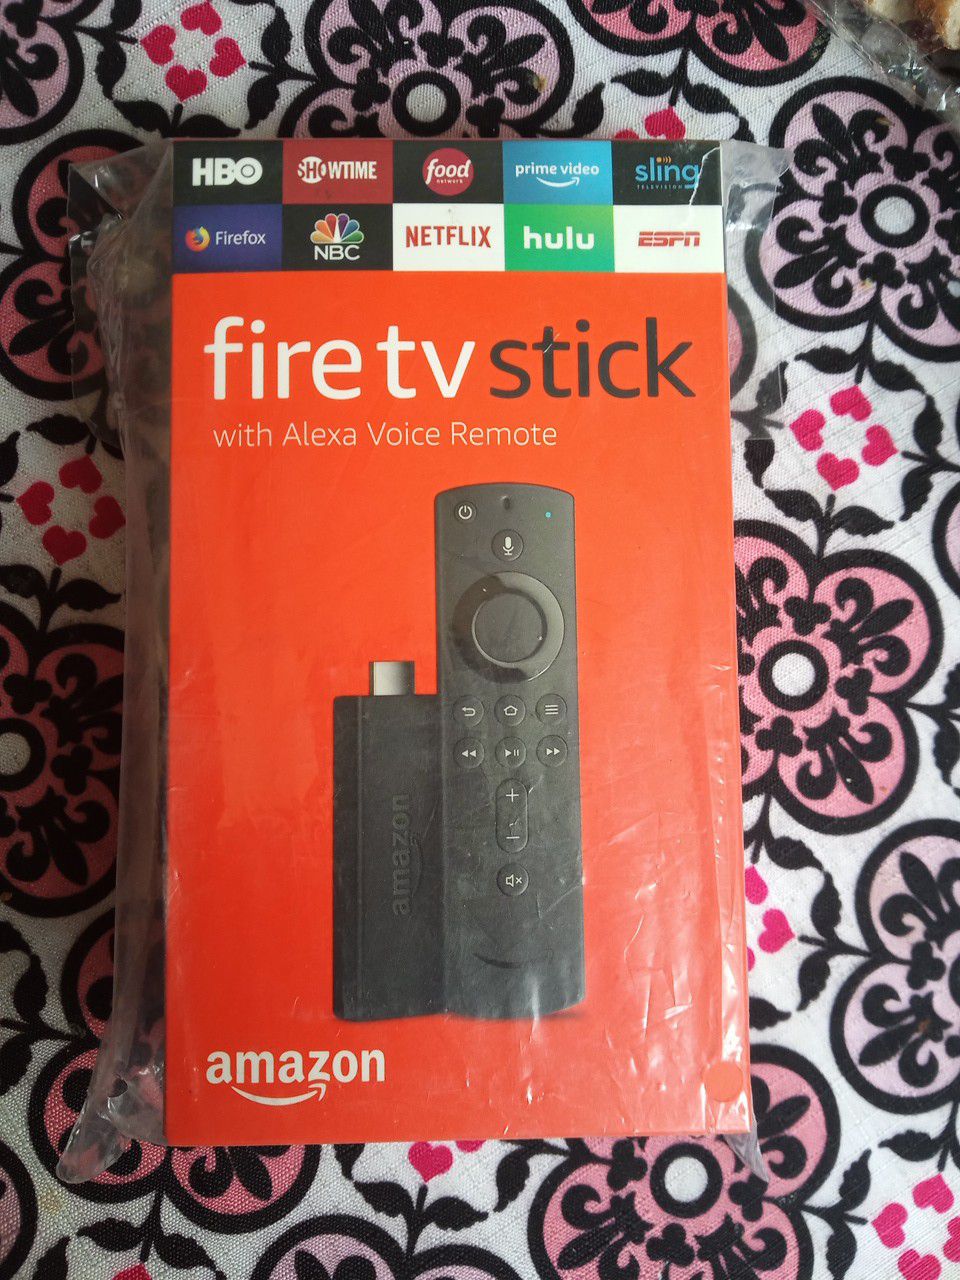 Fire TV stick with the Alexa voice Remote